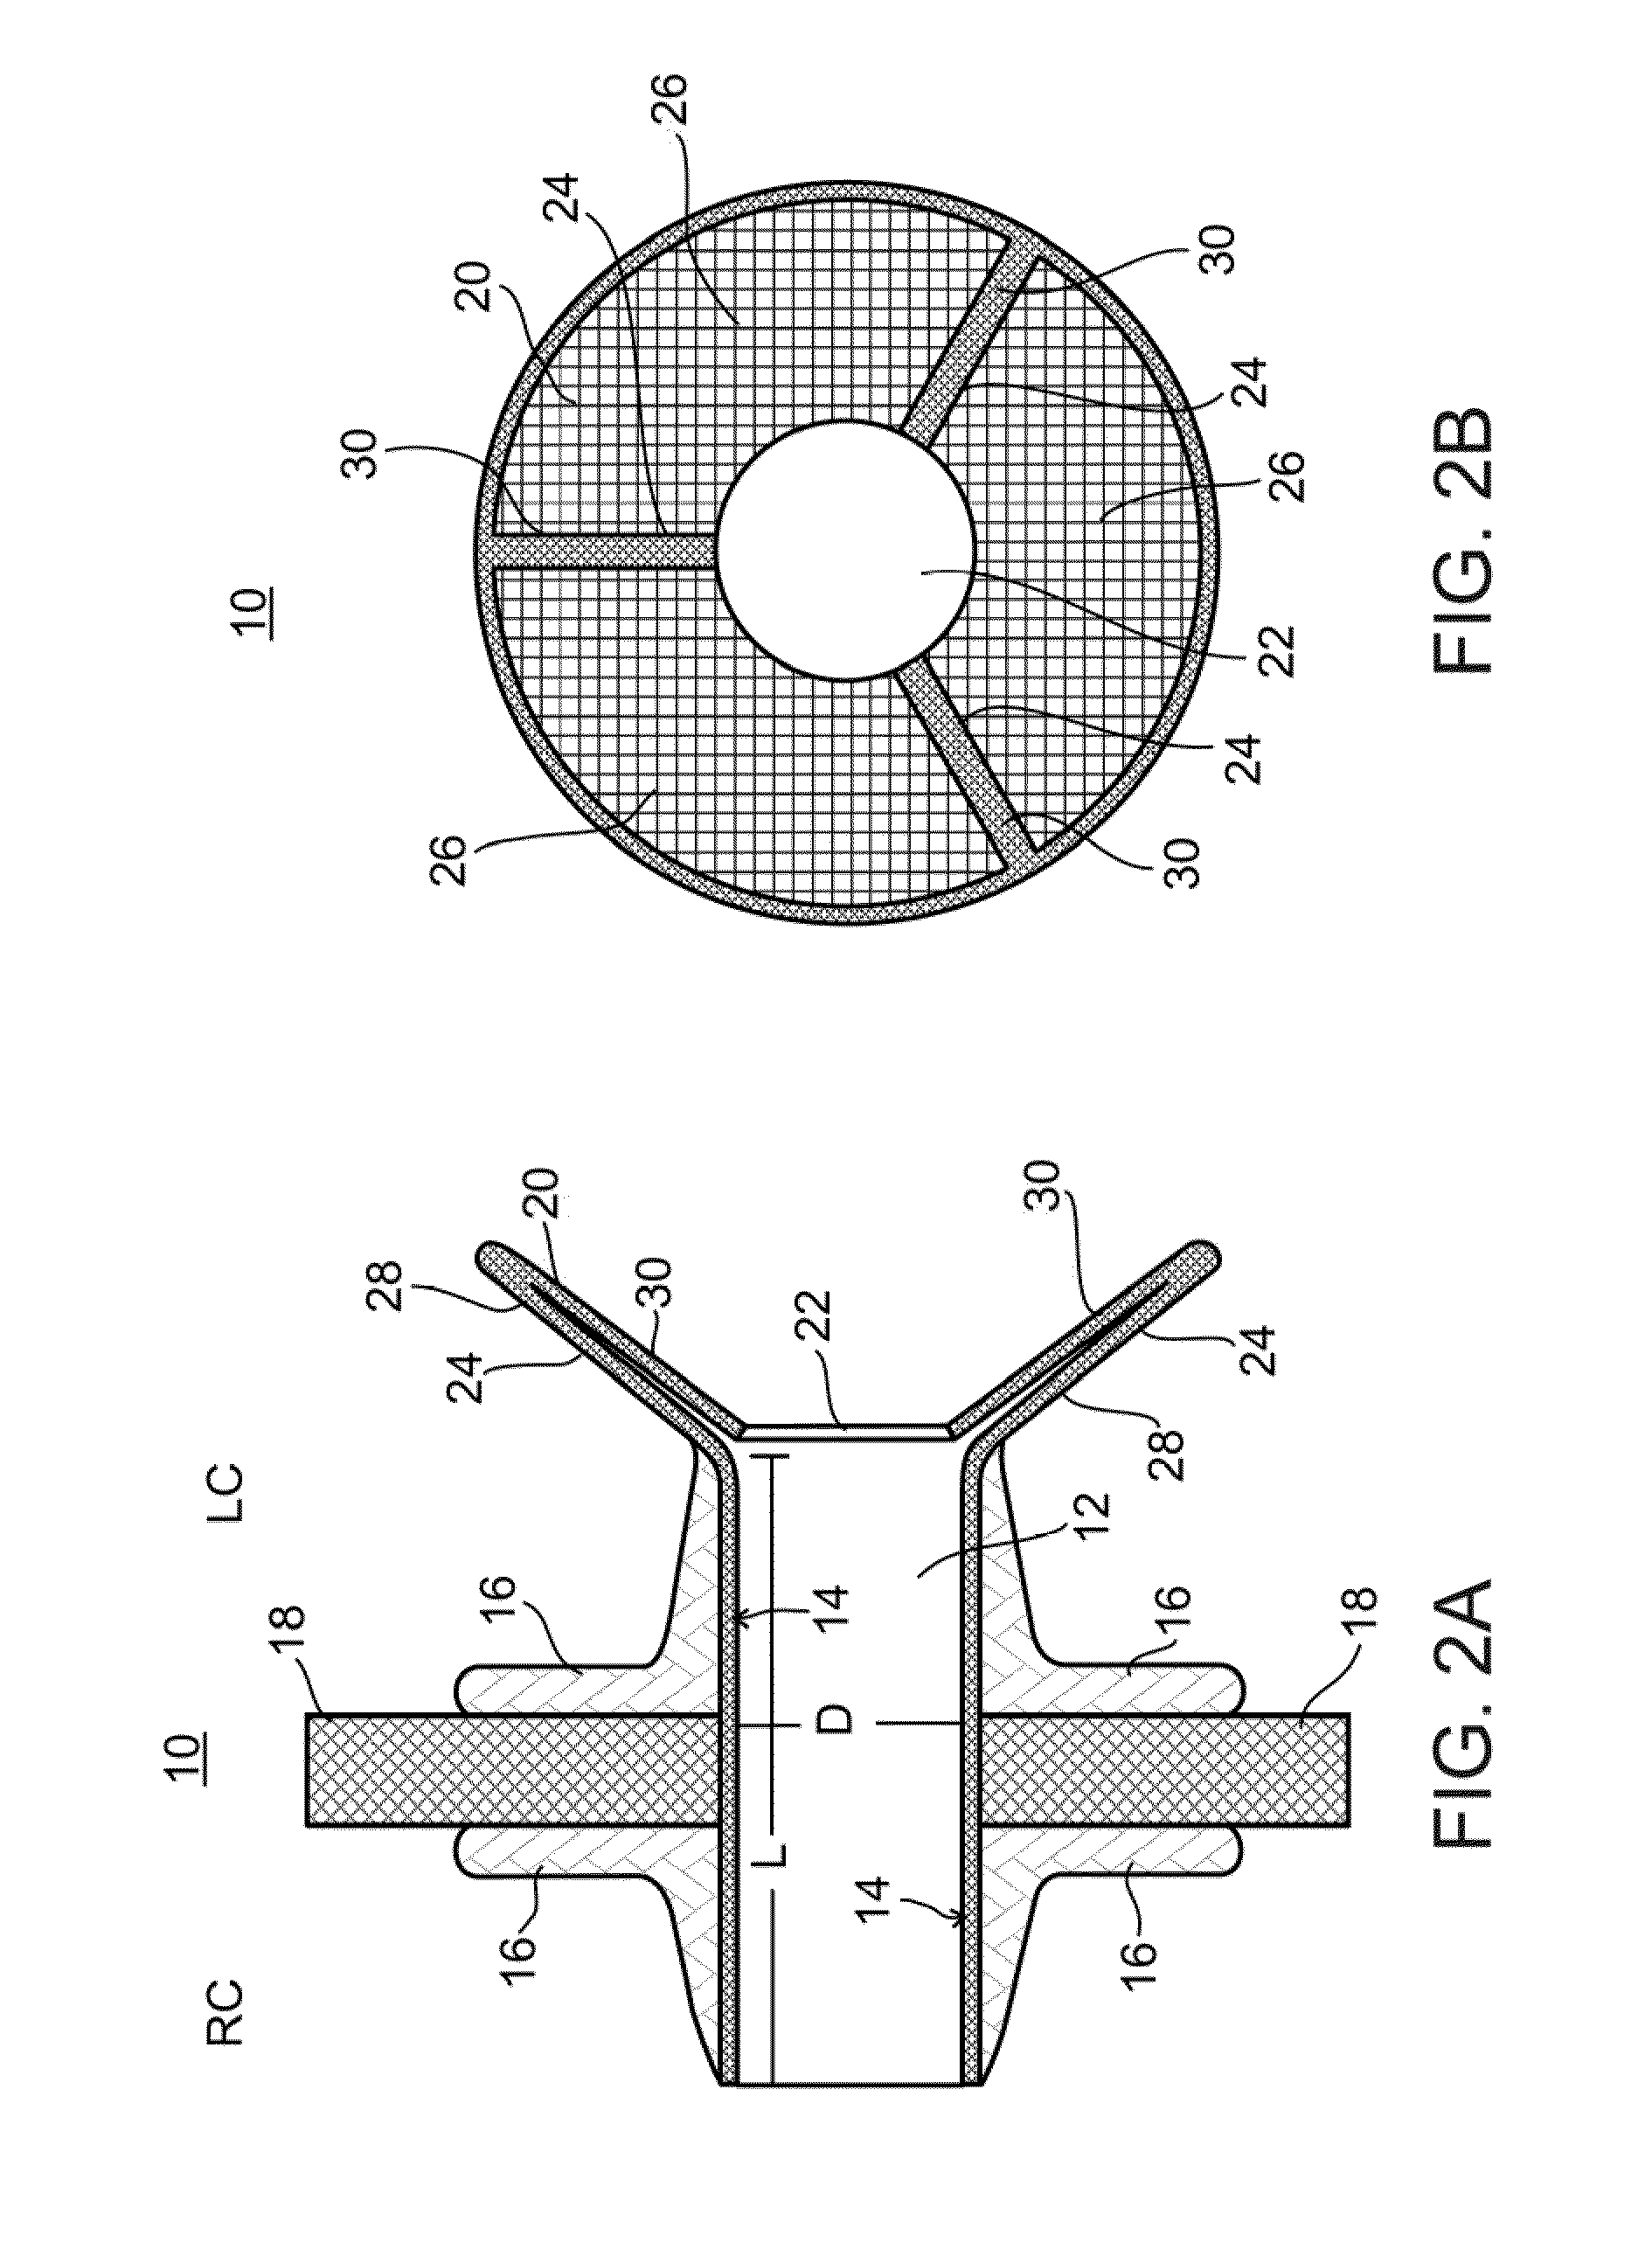 Device and method for regulating pressure in a heart chamber